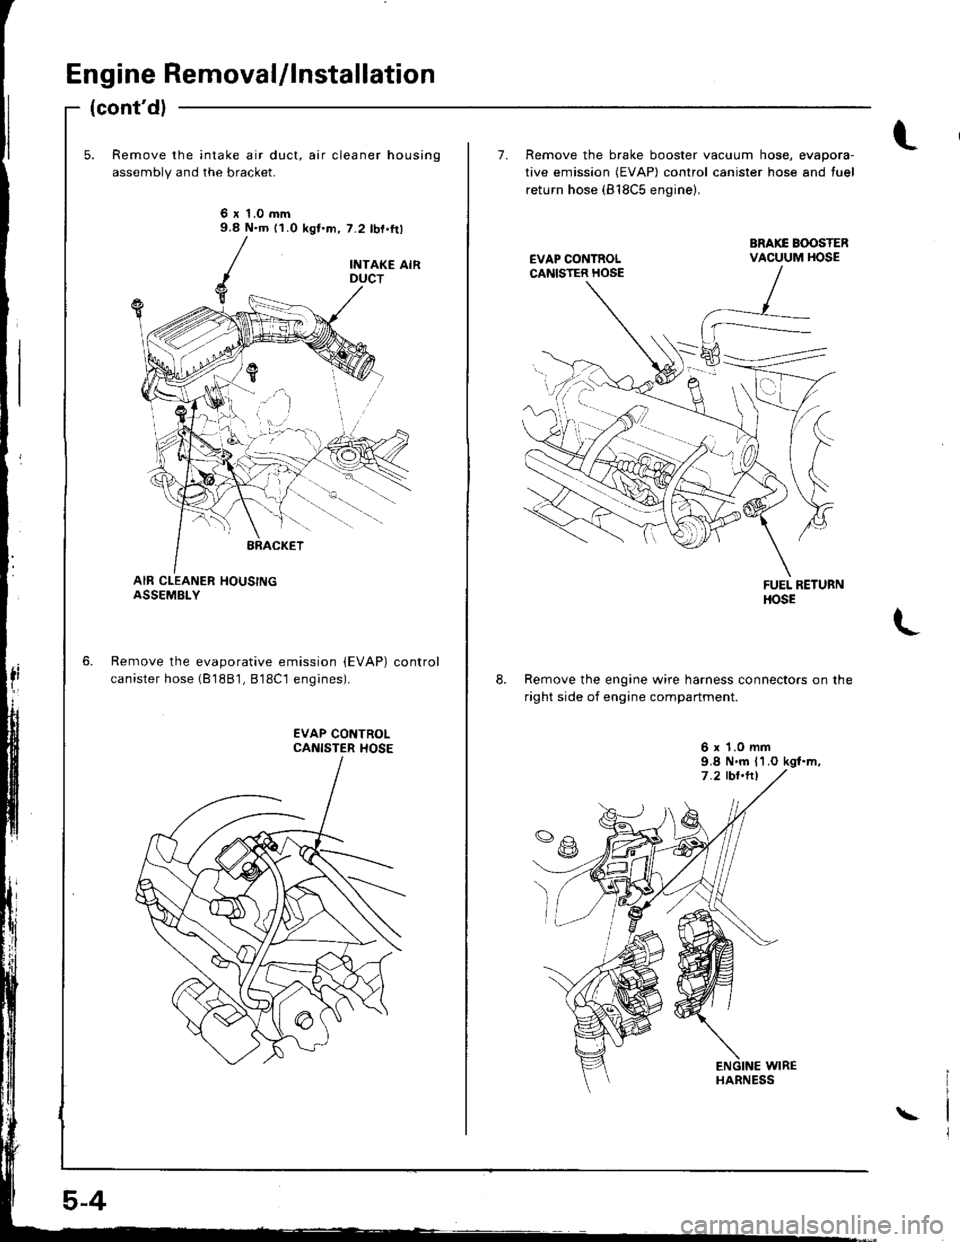 HONDA INTEGRA 1998 4.G Service Manual En gine Remova l/l nstal lation
(contdl
Remove the intake air duct, air cleaner housing
assembly and the bracket.
6 r t.0 mm9.8 N.m (1.0 kgt.m, 7.2 lbf.ft)
Remove the evaporative emission {EVAP)
can